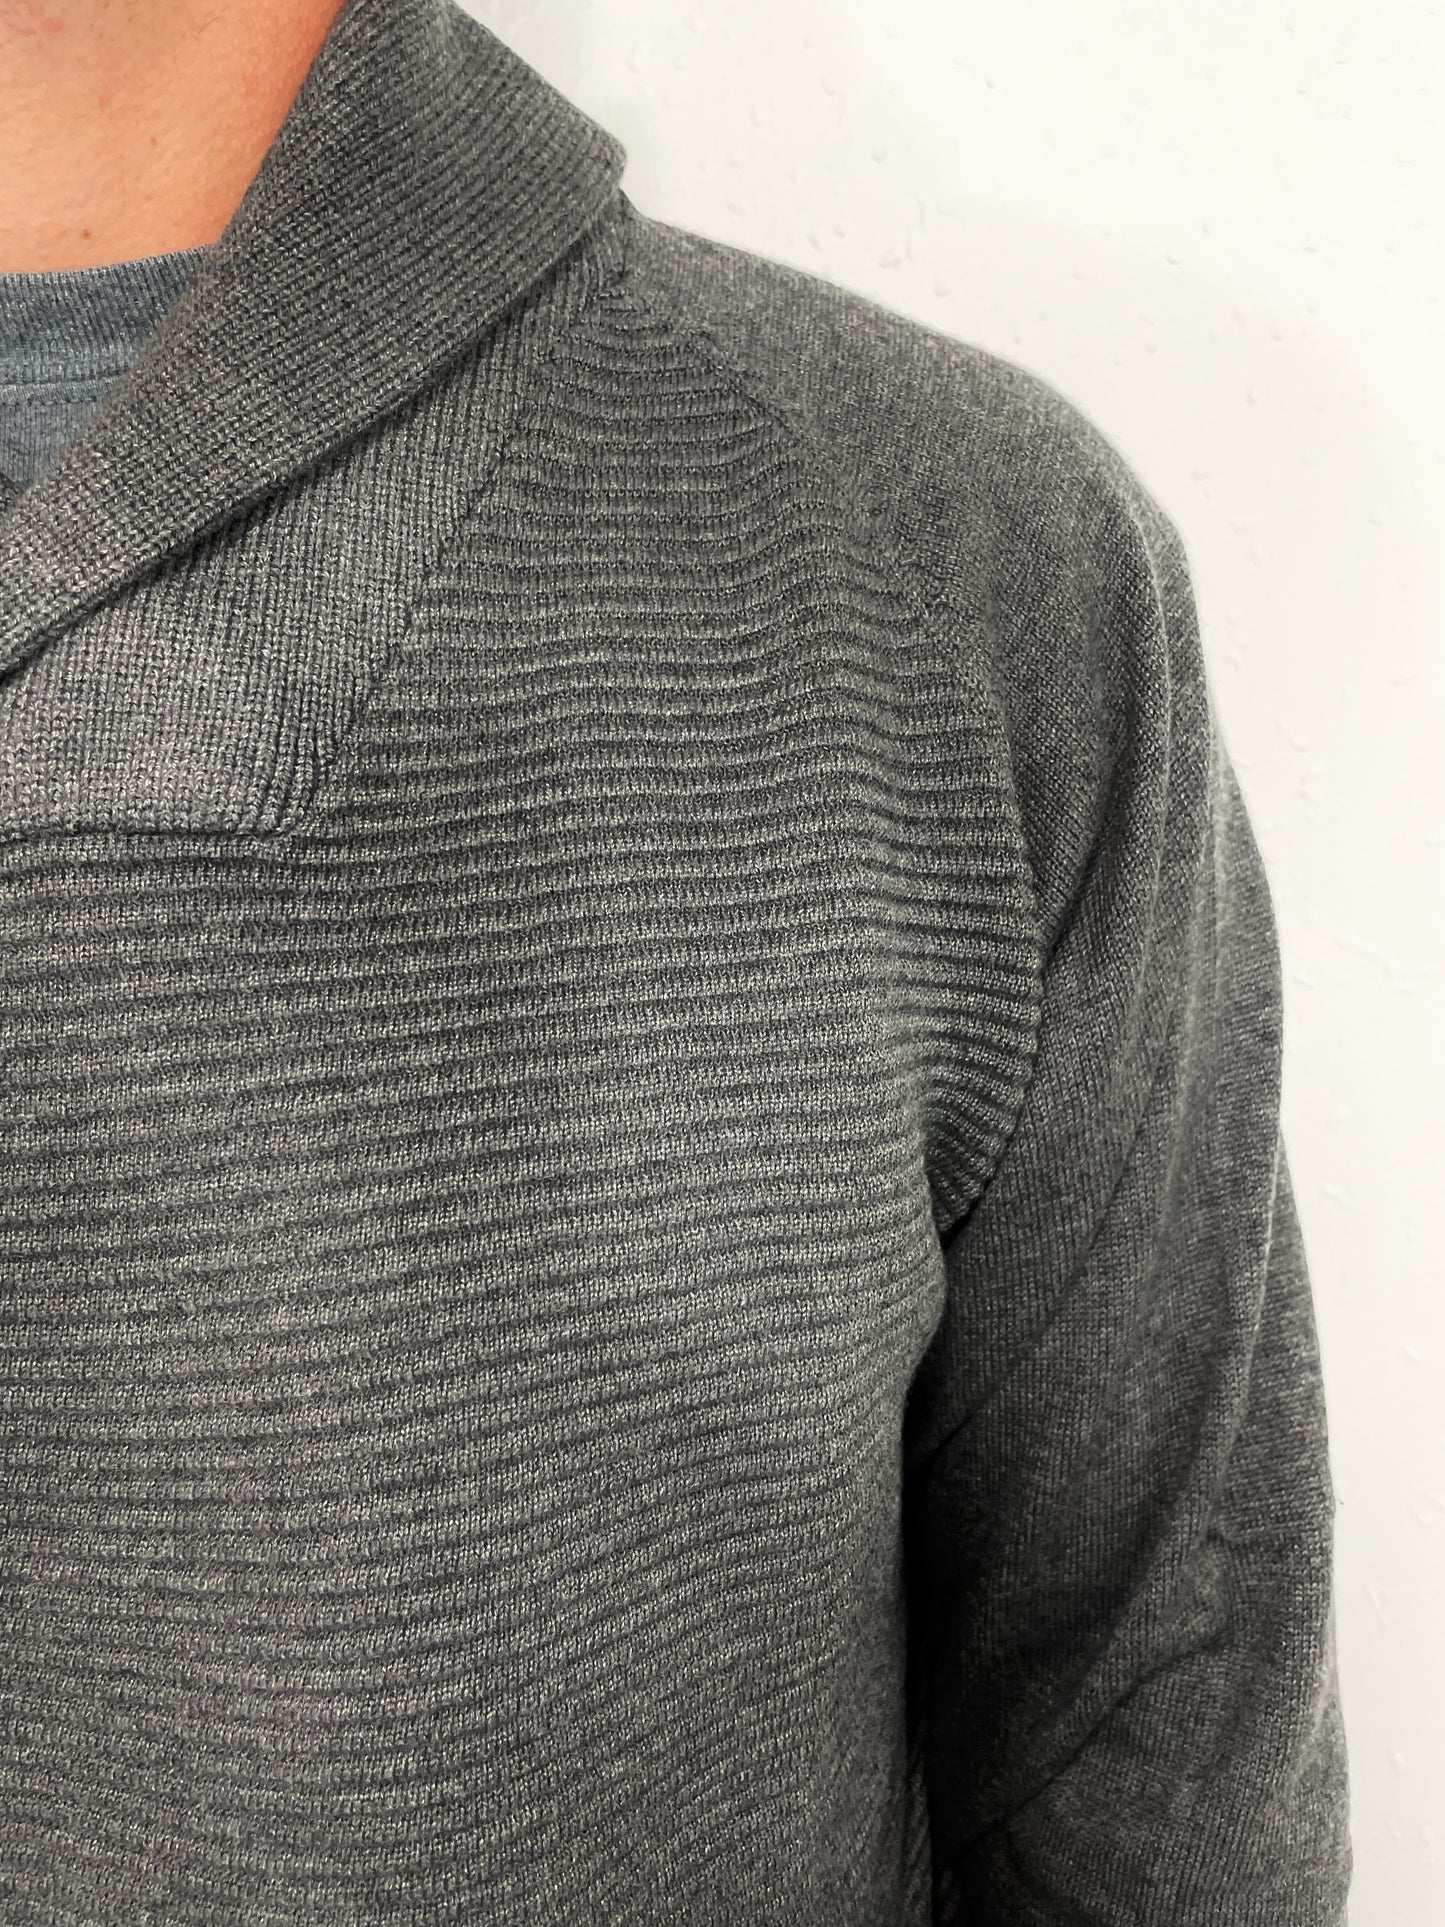 F/X FUSION LEO PULLOVER SWEATER - HEATHERED CHARCOAL